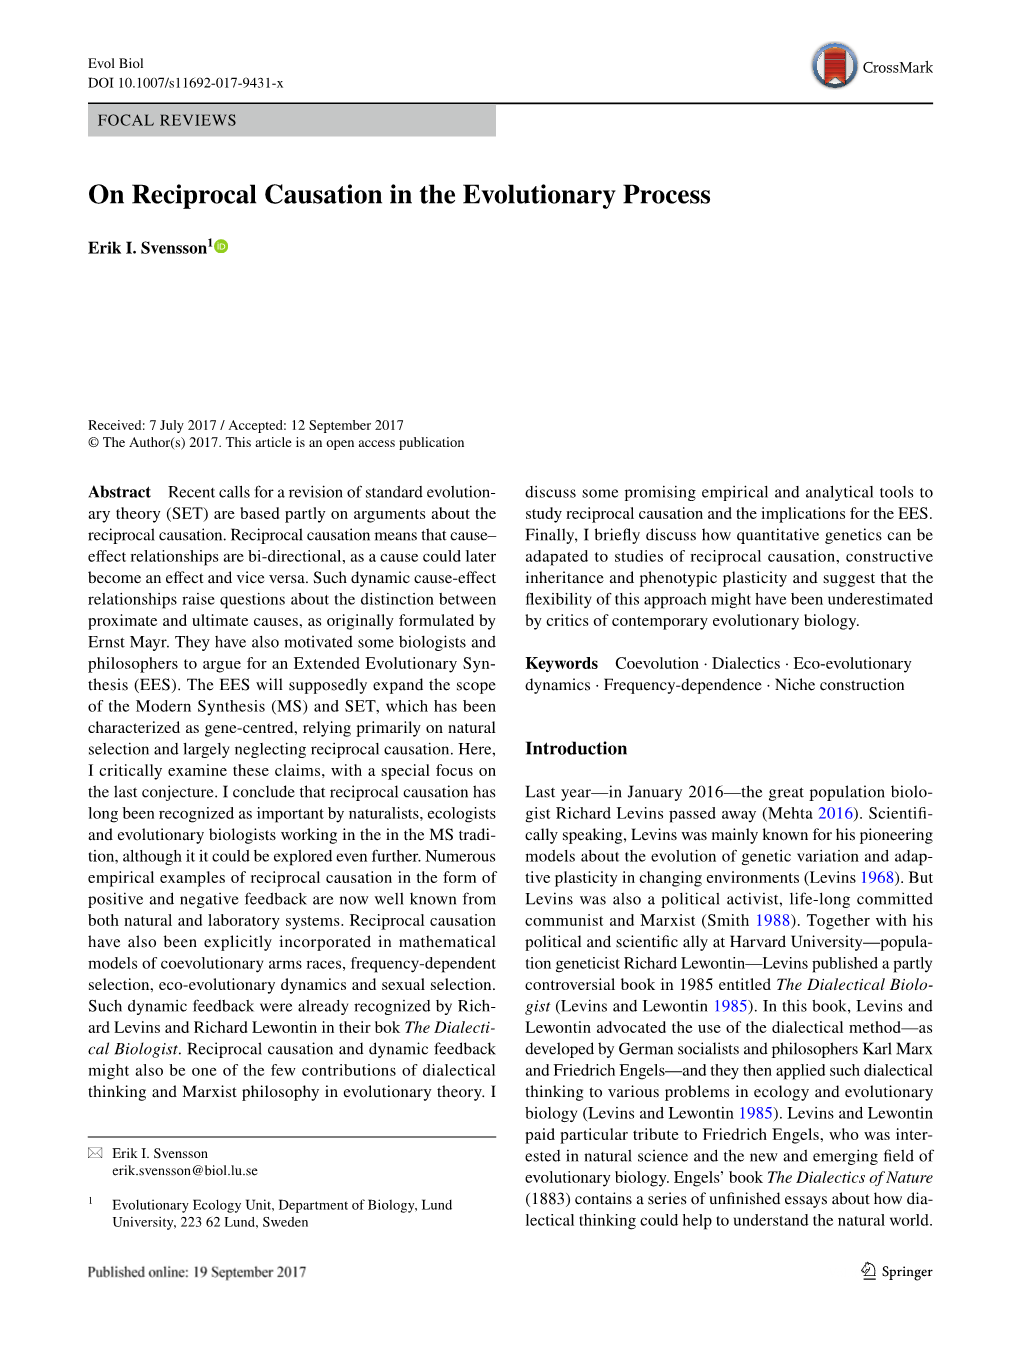 On Reciprocal Causation in the Evolutionary Process